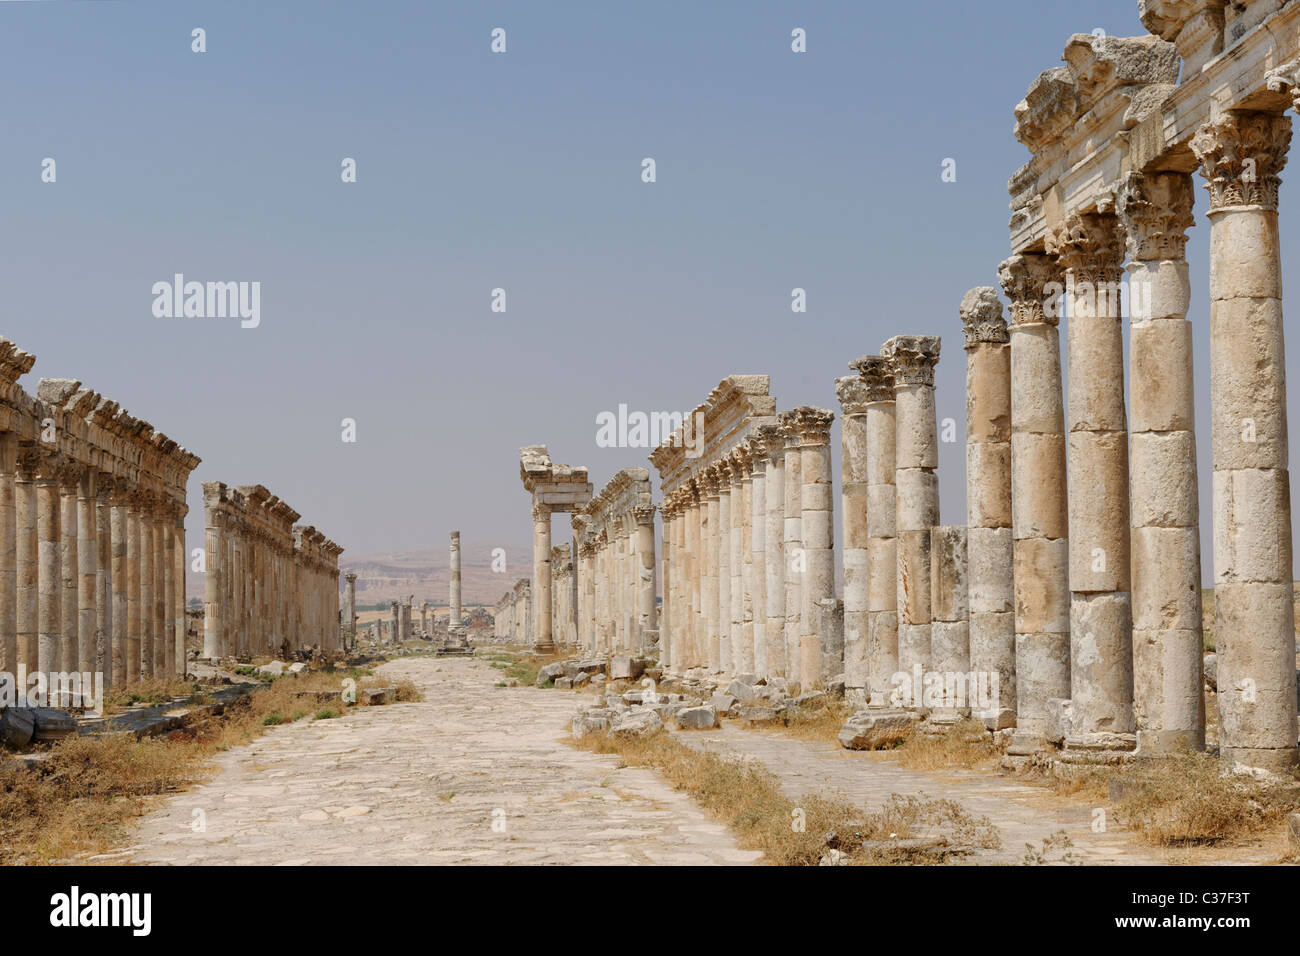 The majestic Colonnaded Street of the ancient city of Apamea Syria Stock Photo